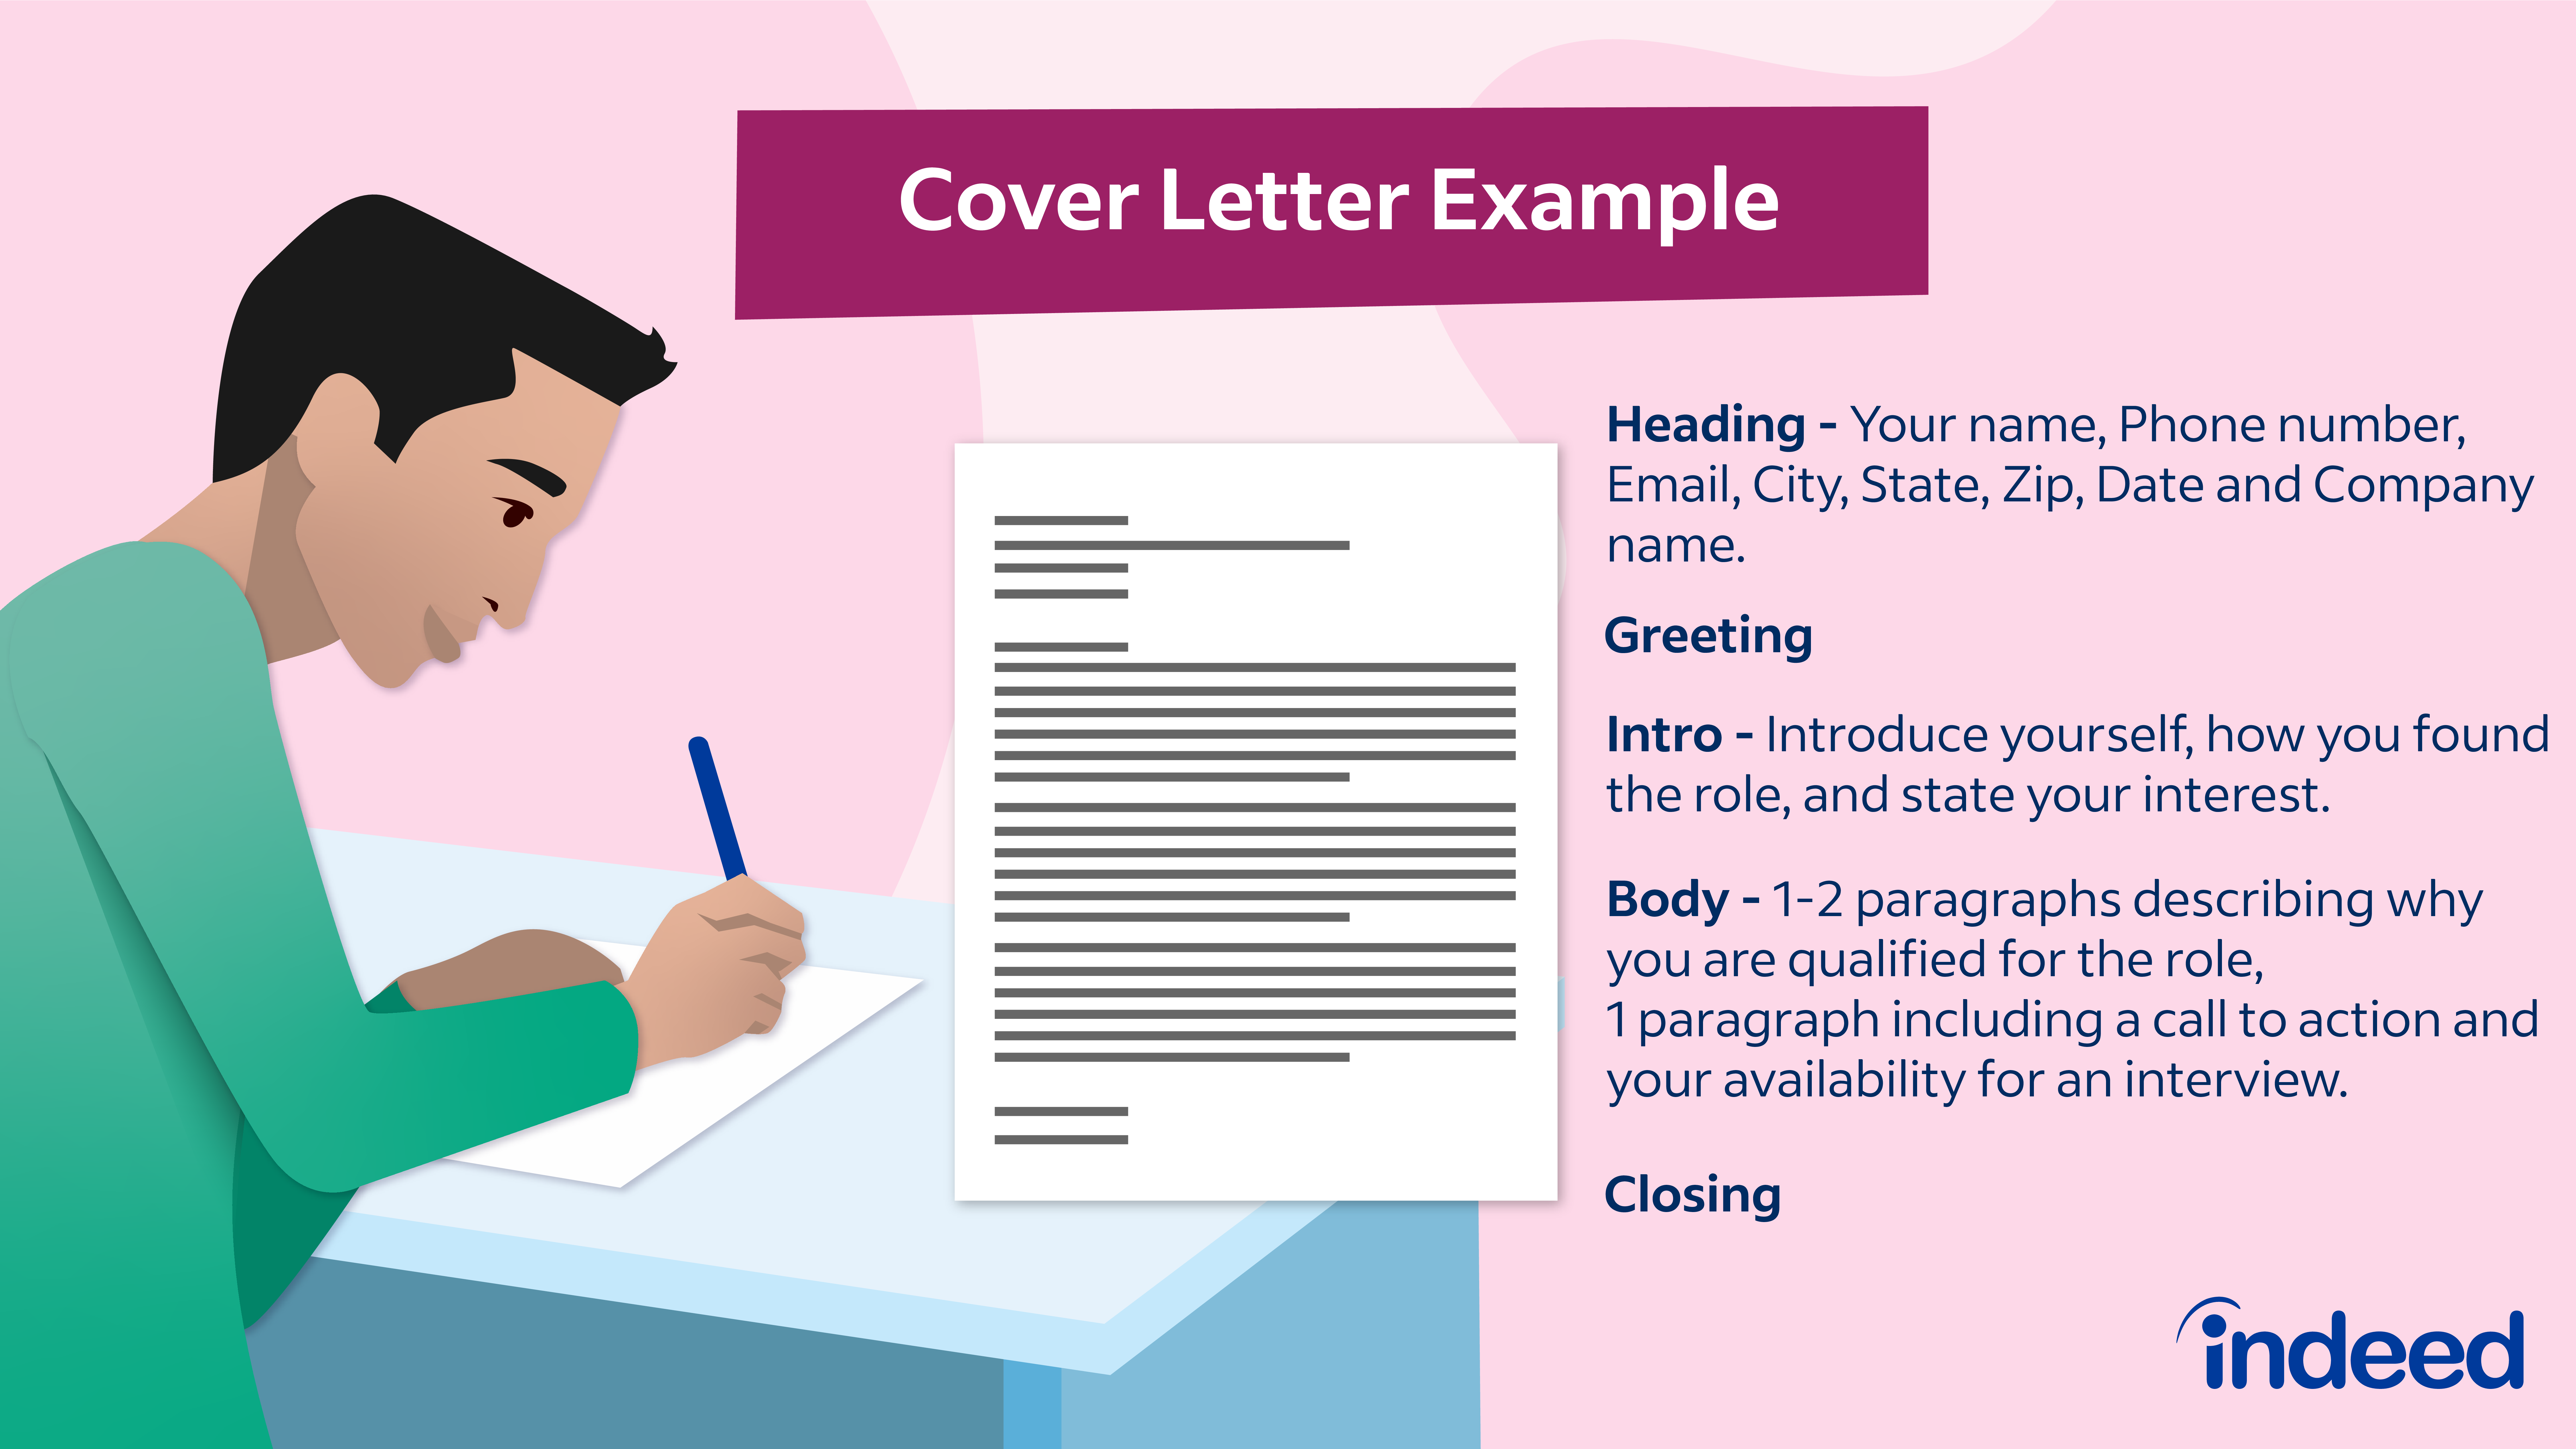 Short Cover Letter Examples: How to Write a Short Cover Letter